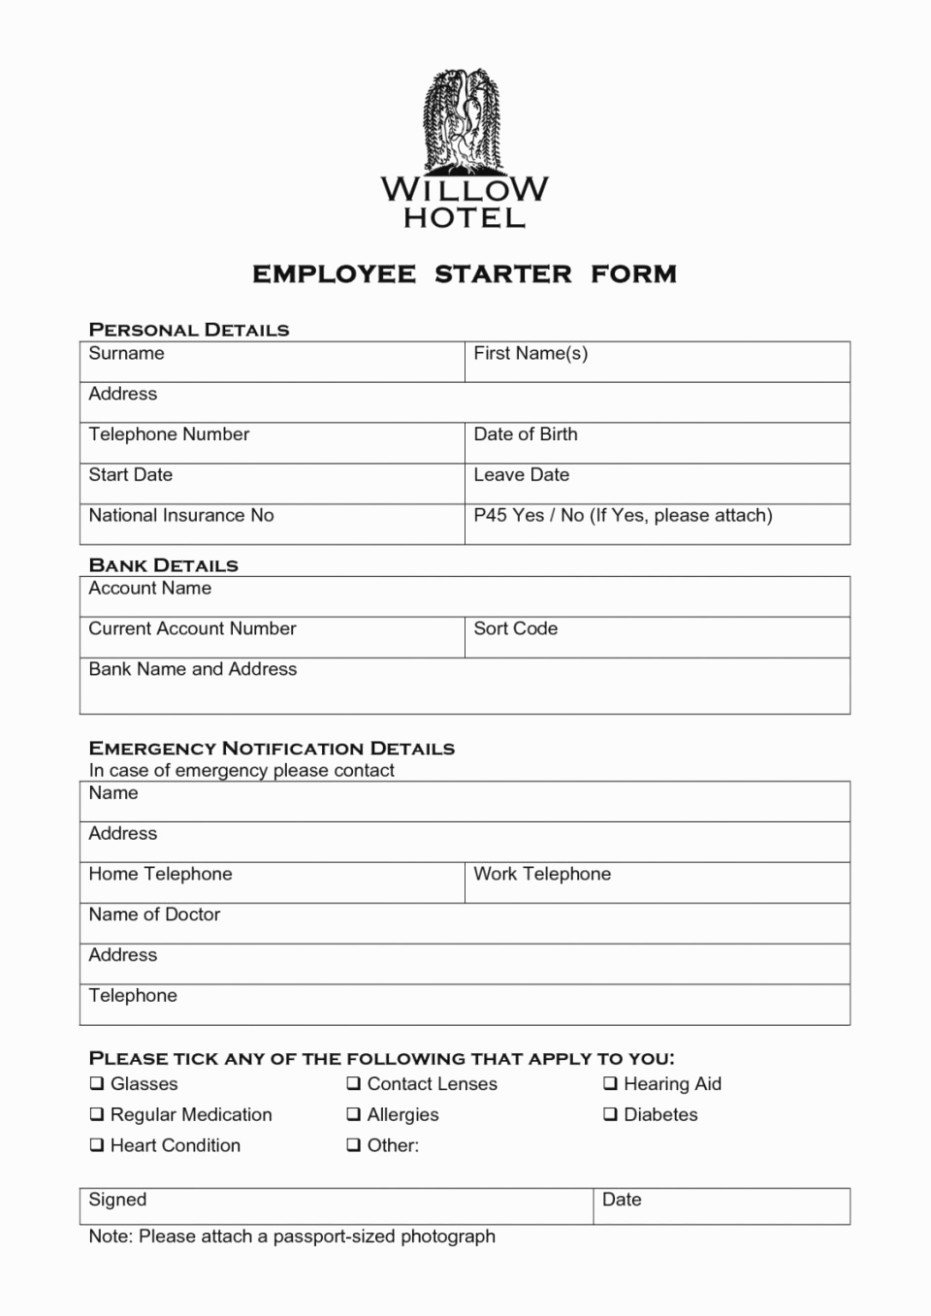 New Hire Paperwork Checklist Template Elegant the Modern Rules New